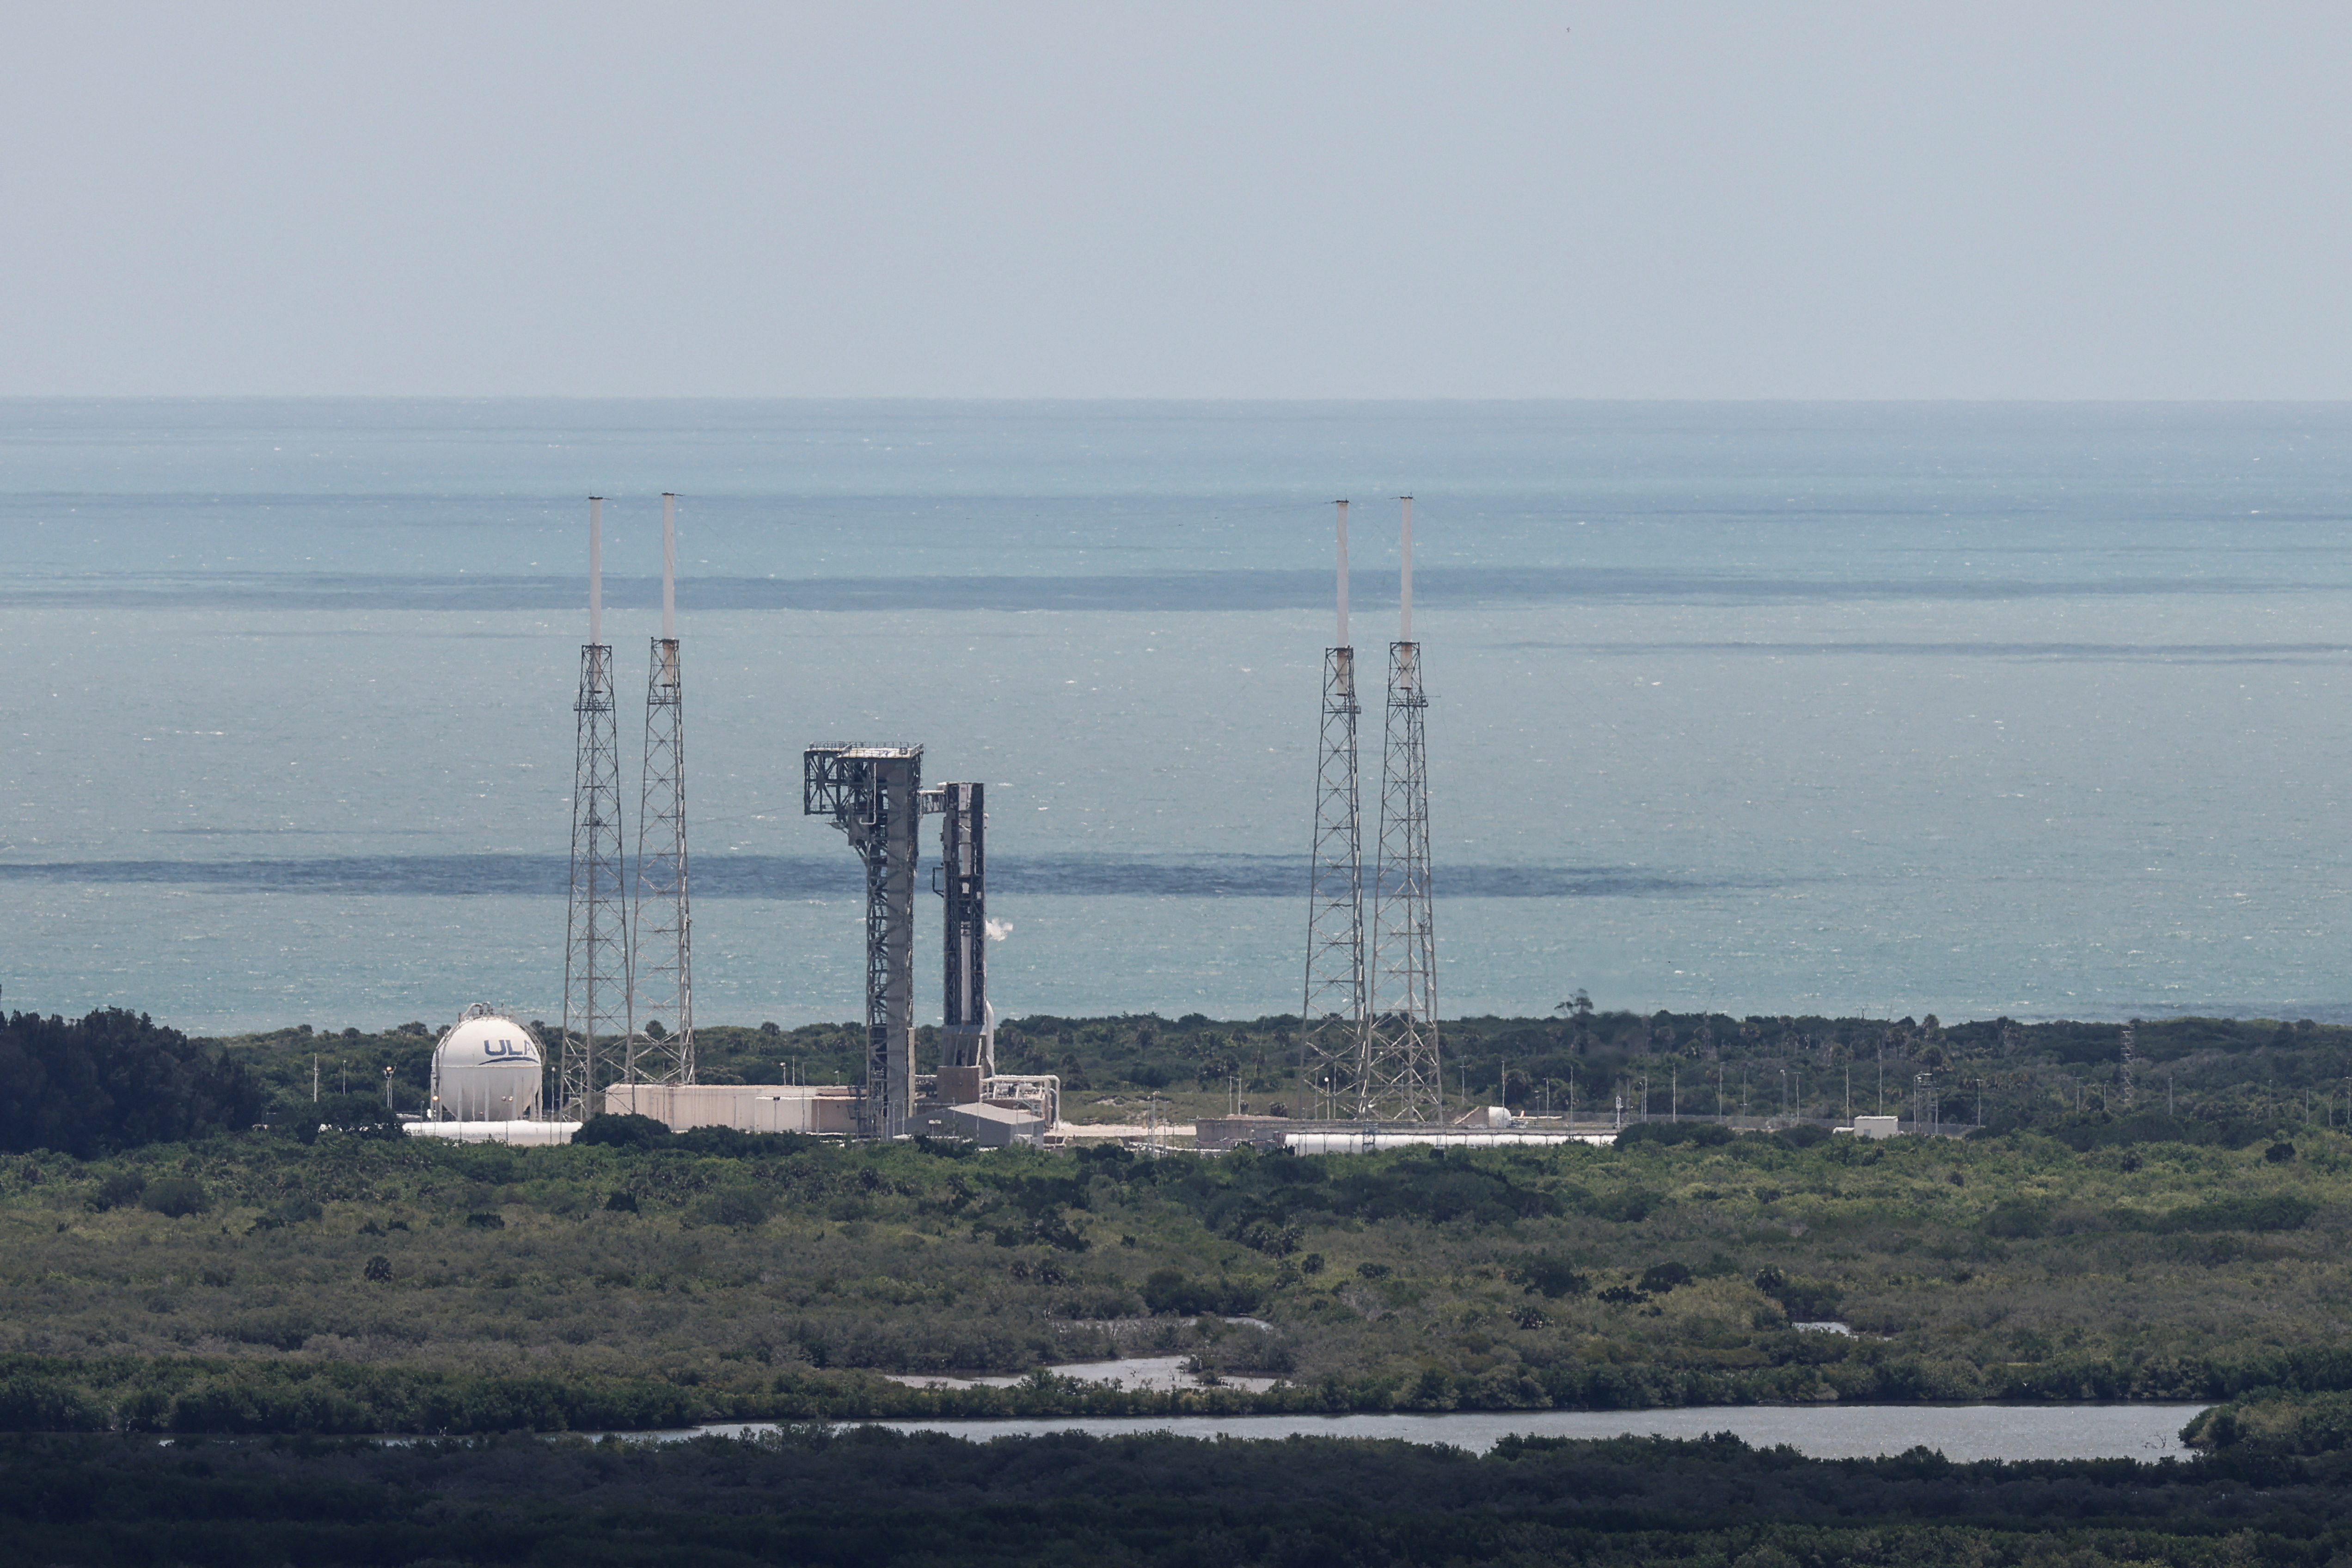 Boeing's Starliner-1 Crew Flight Test (CFT) mission on a United Launch Alliance Atlas V rocket to the International Space Station, in Cape Canaveral